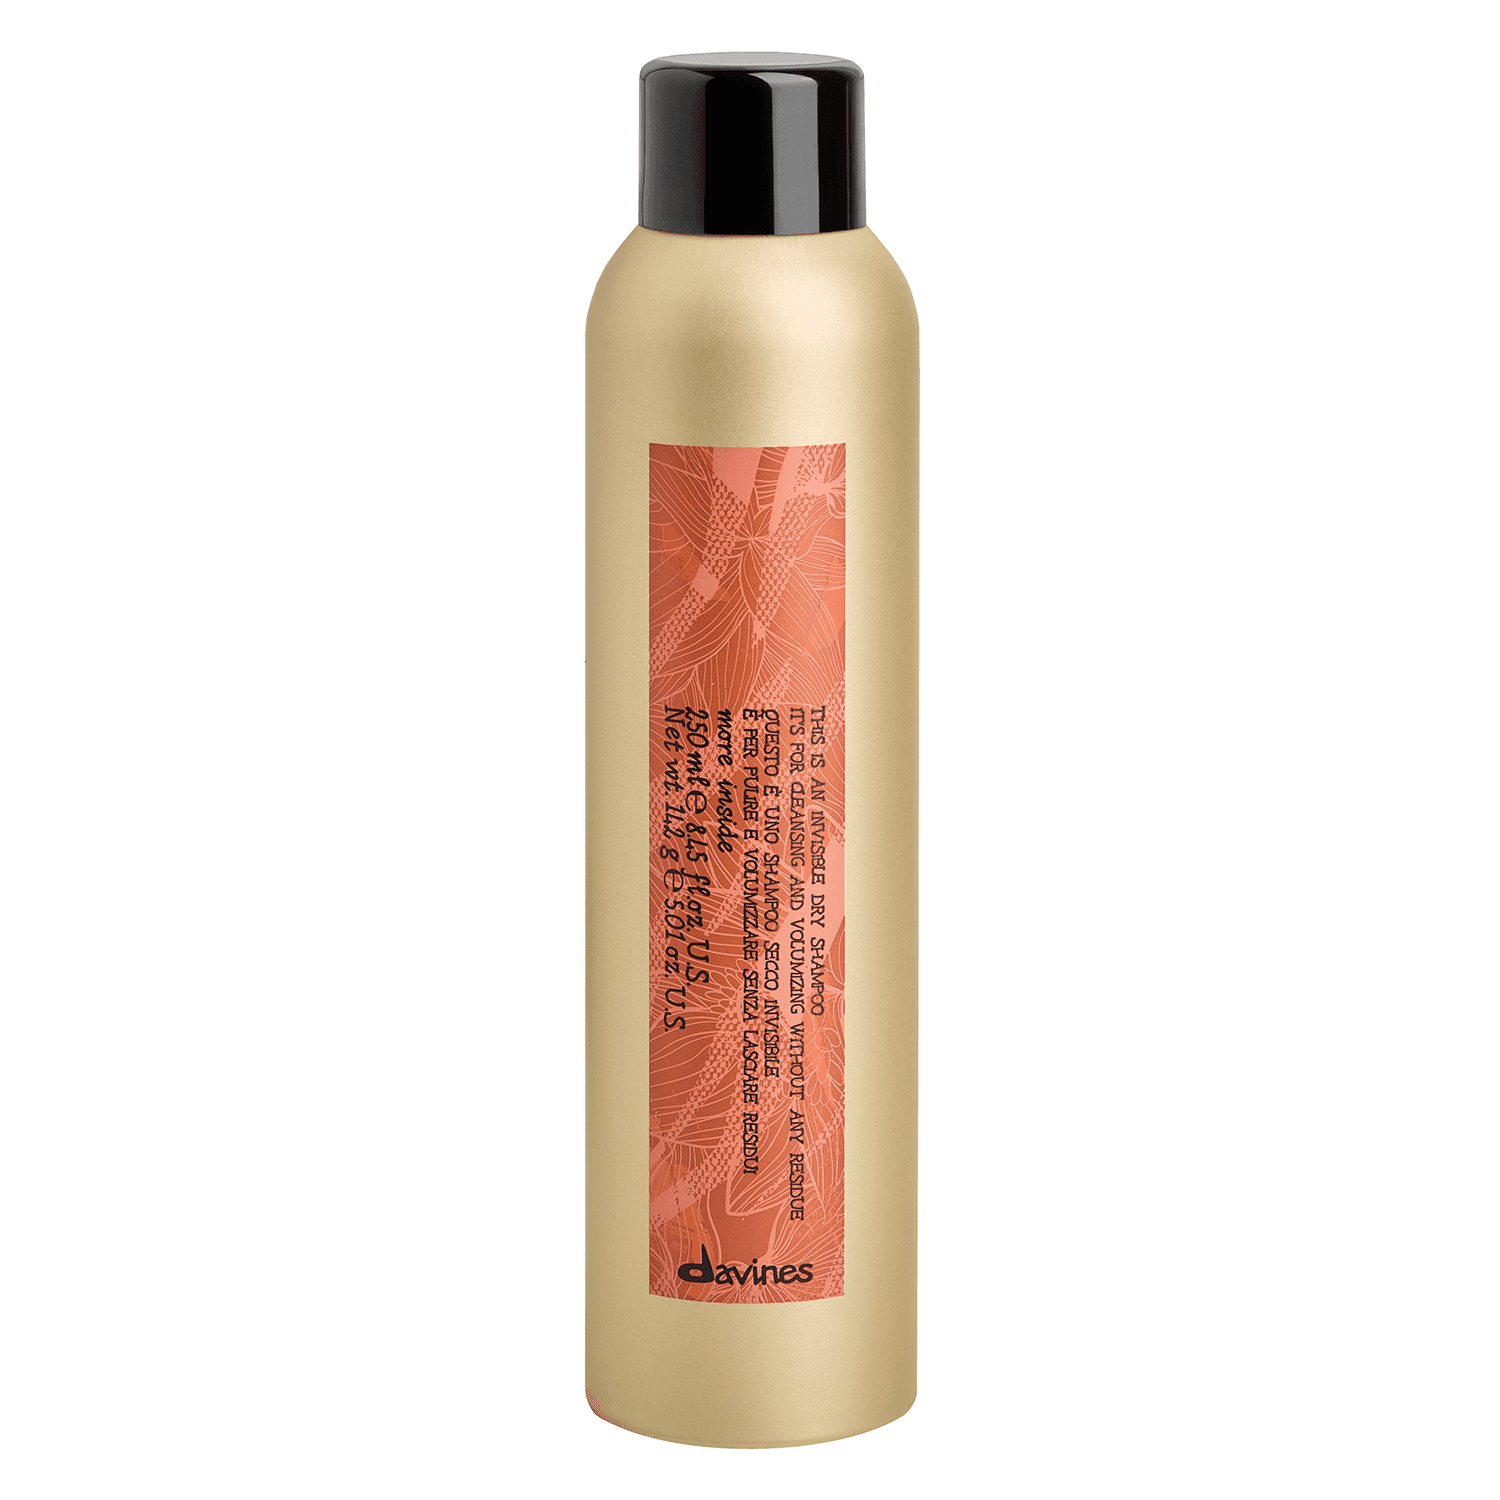 More Inside - Invisible Dry Shampoo